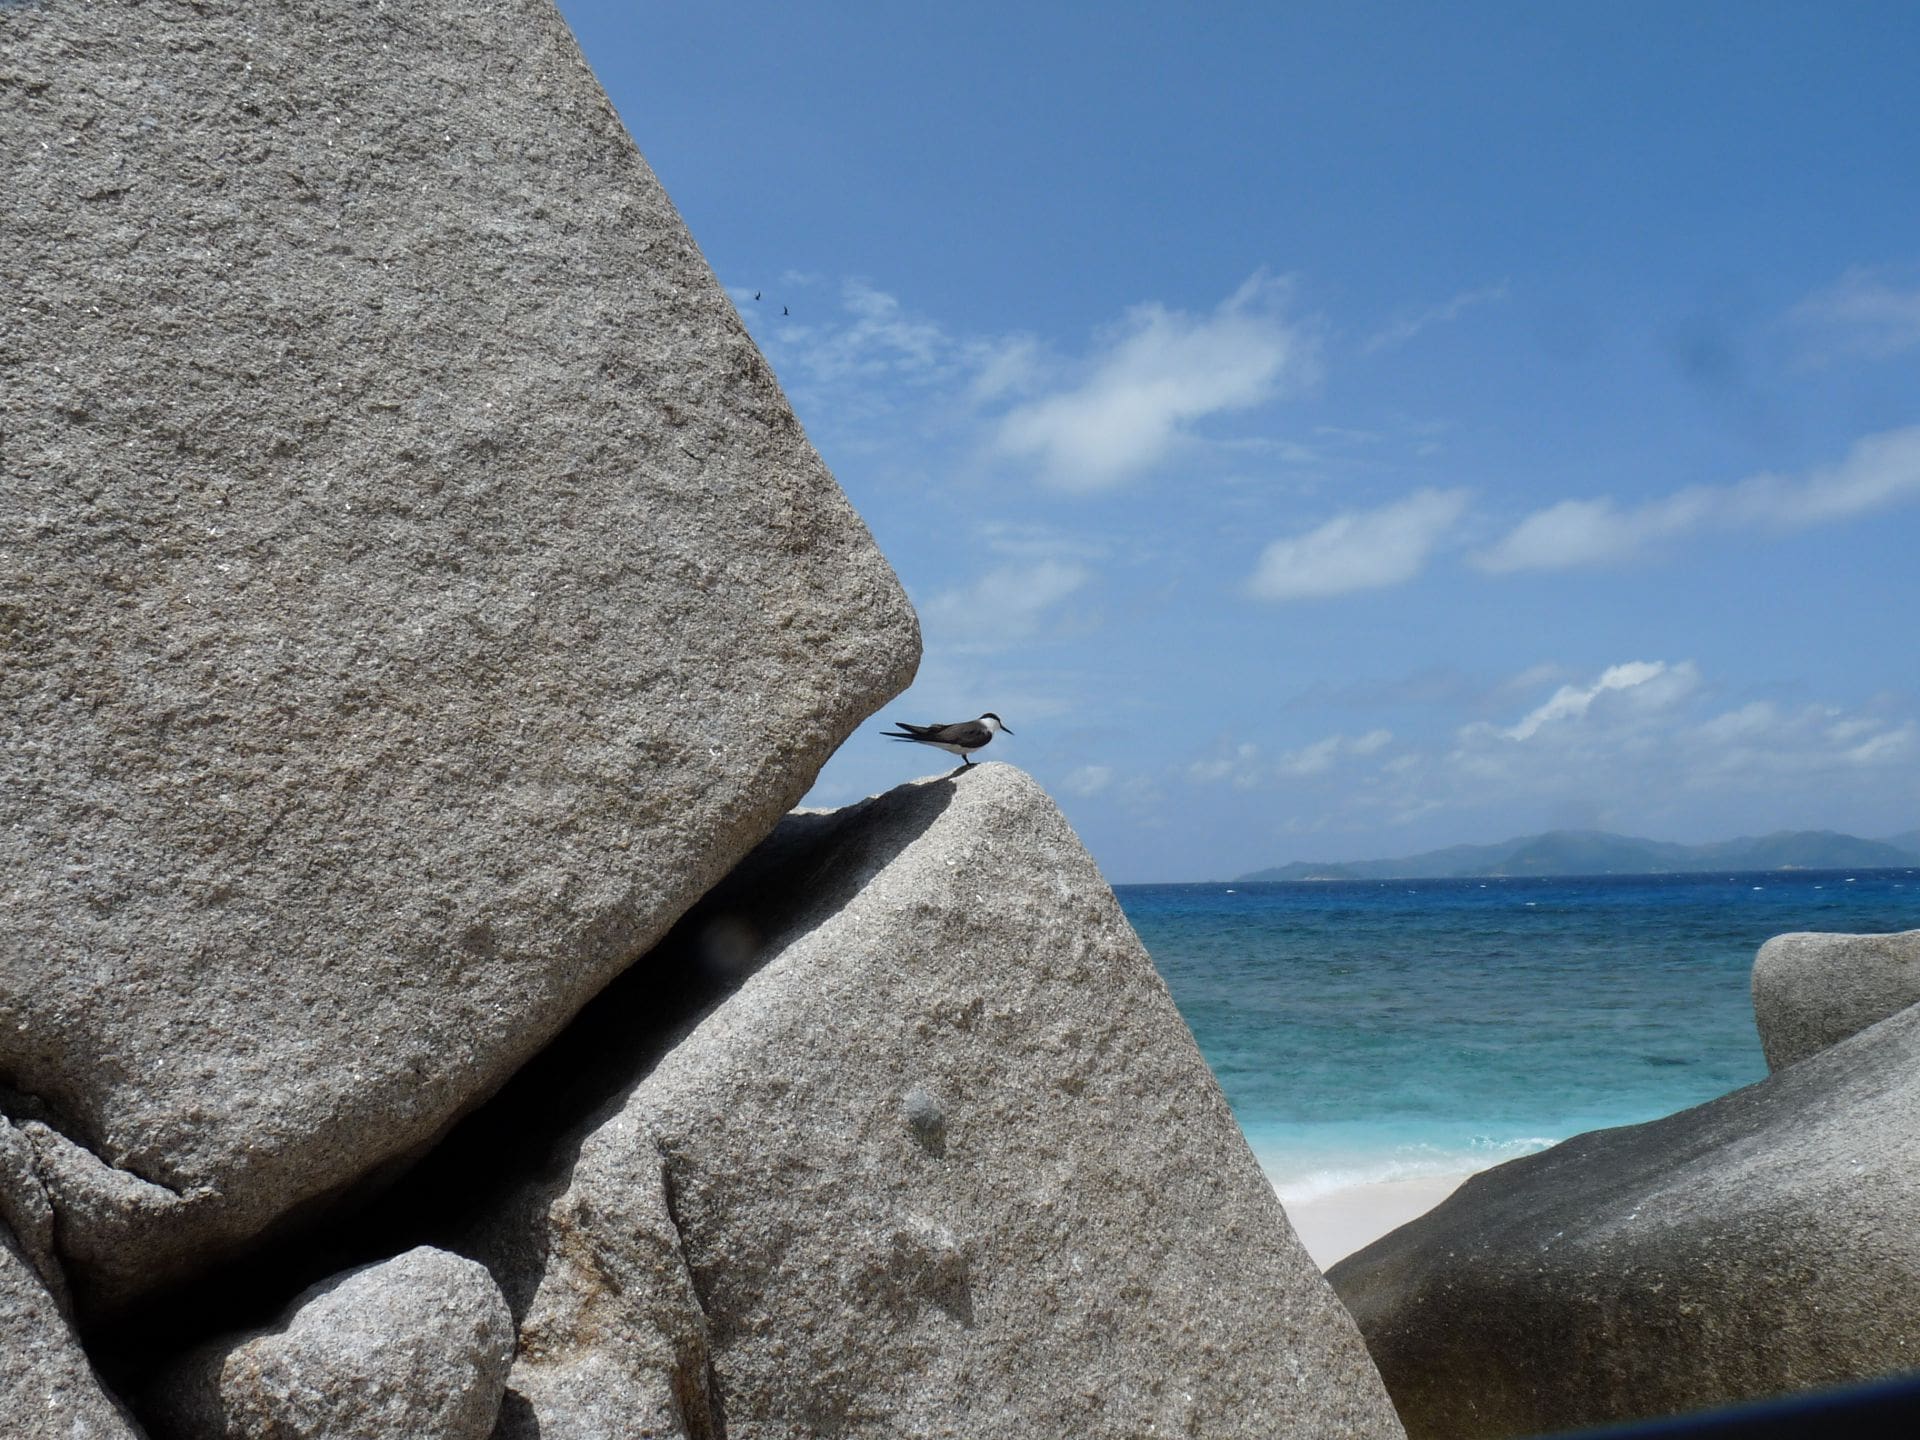 A Sooty Tern rests in a rock cleft on the granitic Cocos Island of Seychelles